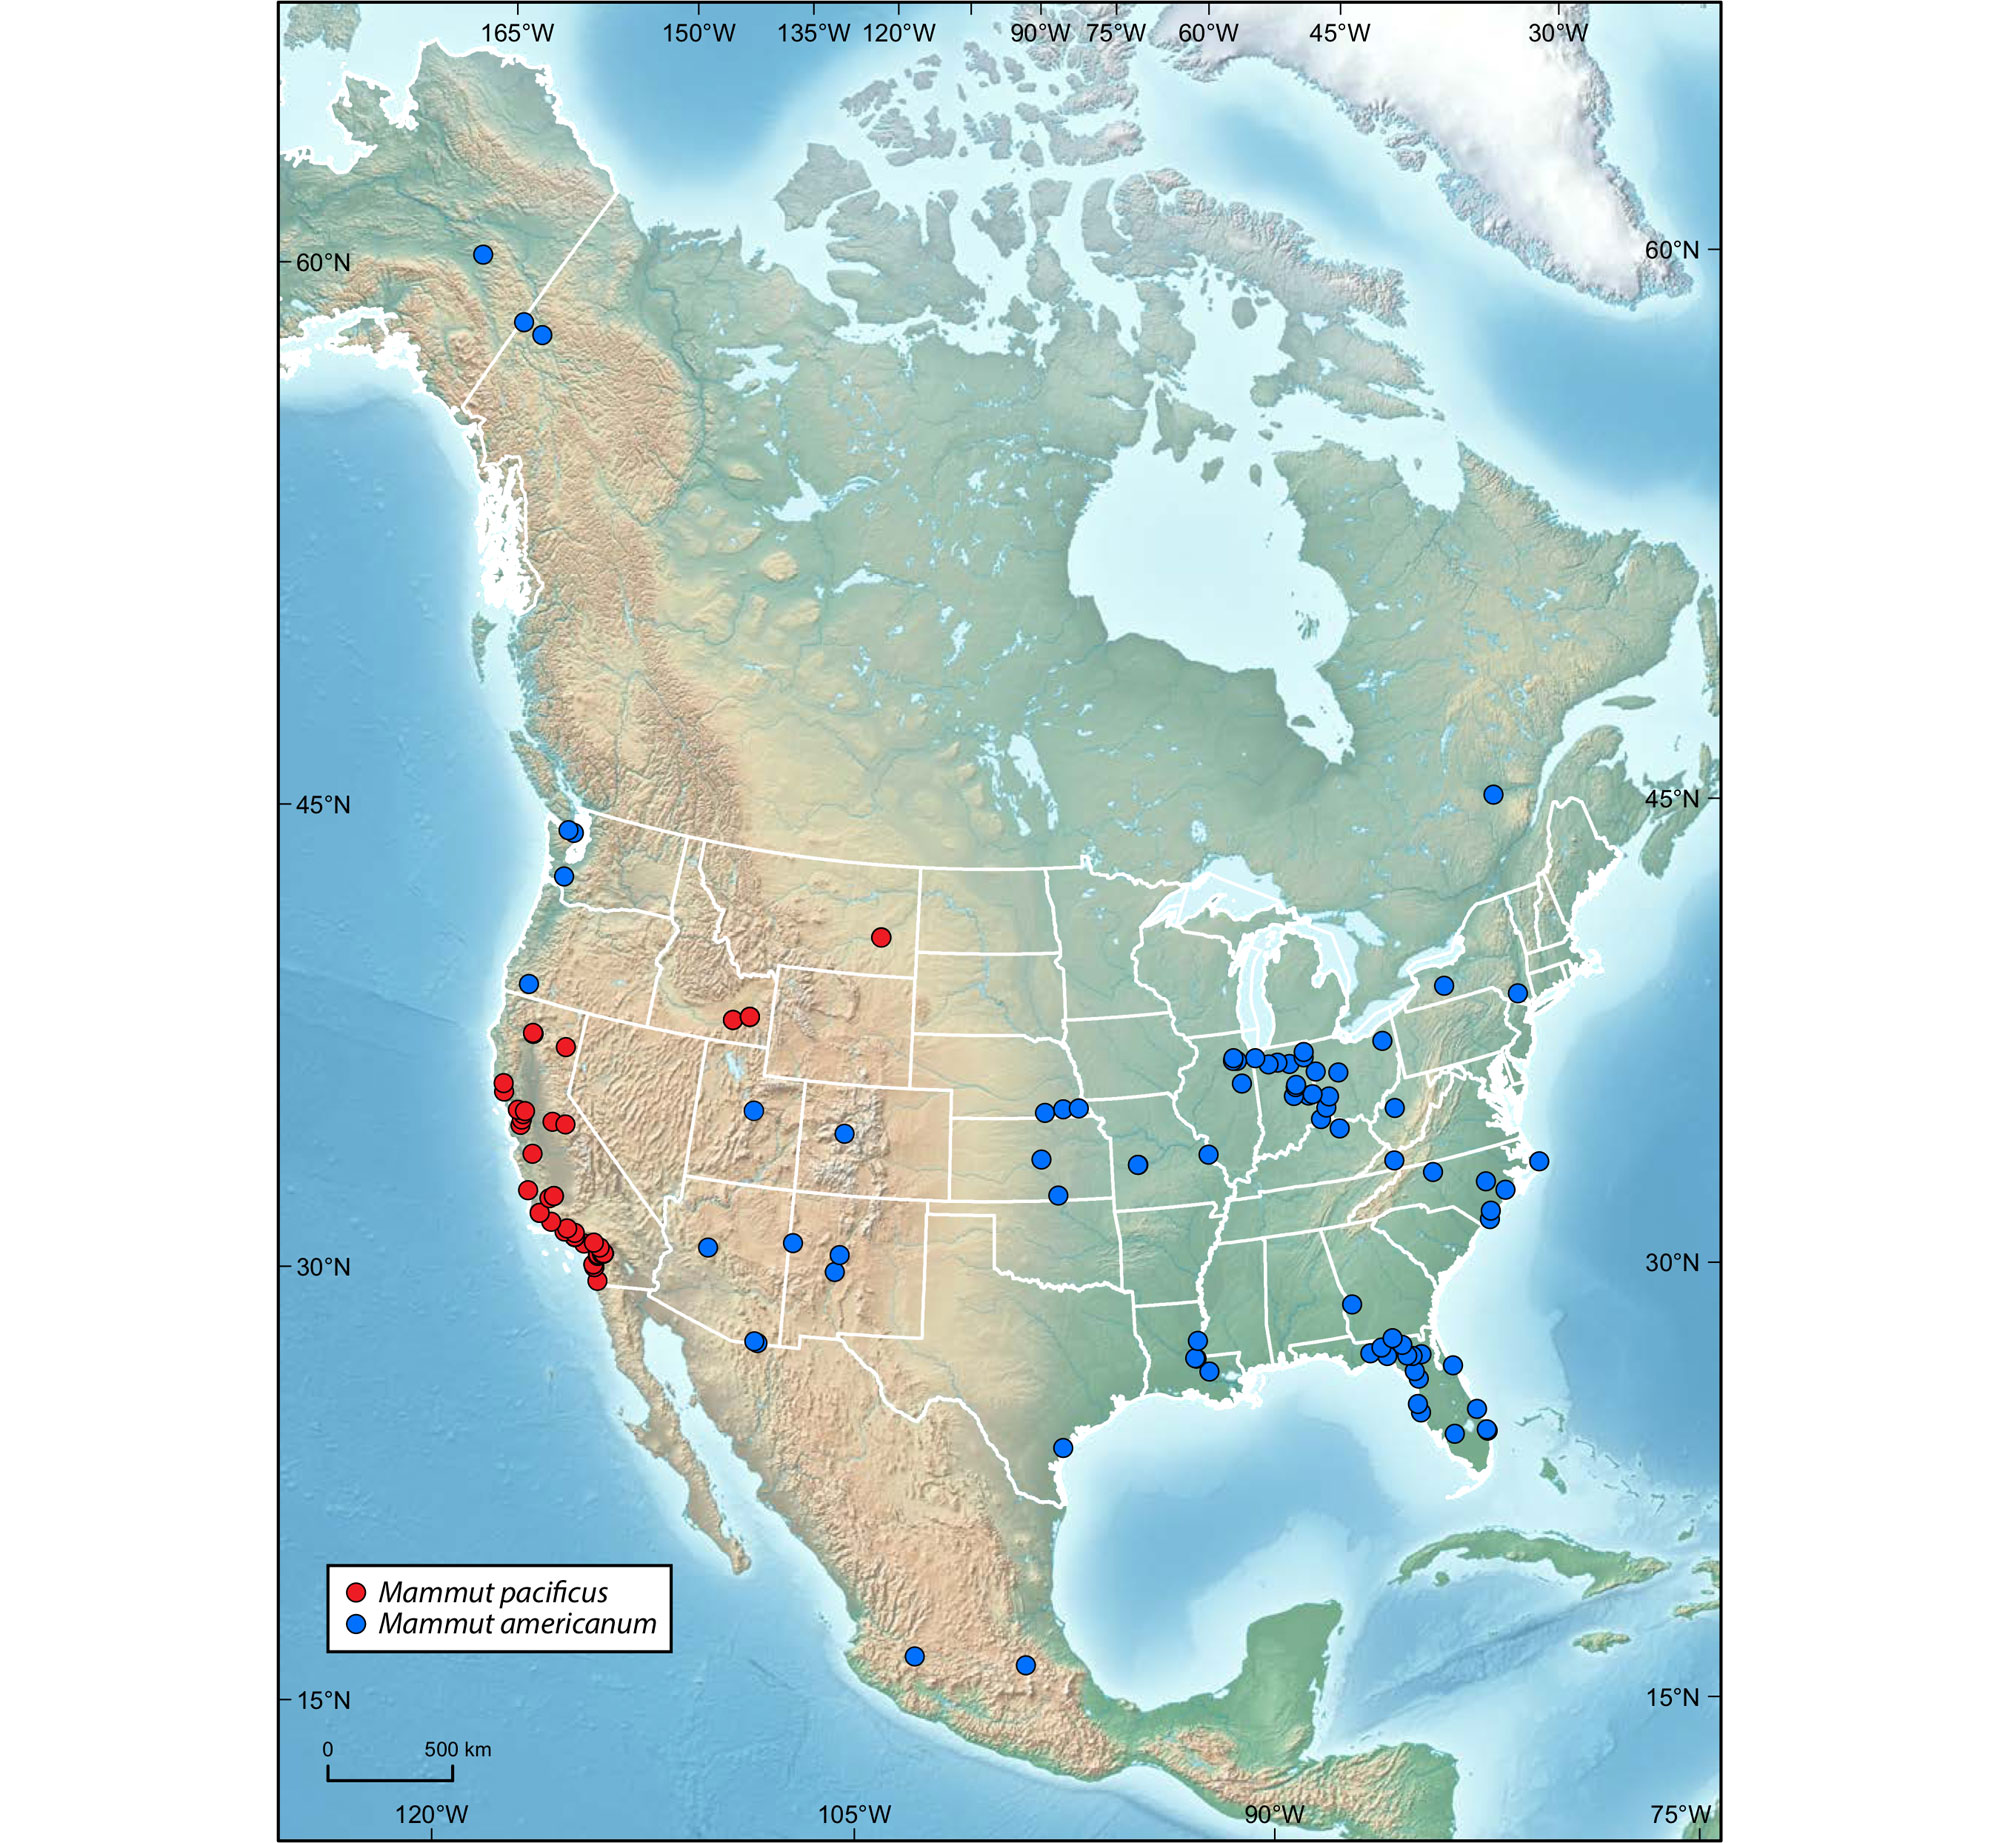 Map of North America showing the distribution of the Pacific mastodon and selected American mastodons. The Pacific mastodon is mostly found near the coast of California, although it has been found at several inland sites in northern California, southeastern Idaho, and Montana. The American mastodon has been found in Alaska, northwest Canada, Washington, and Oregon, as well as  the Southwest, and much of eastern North America.